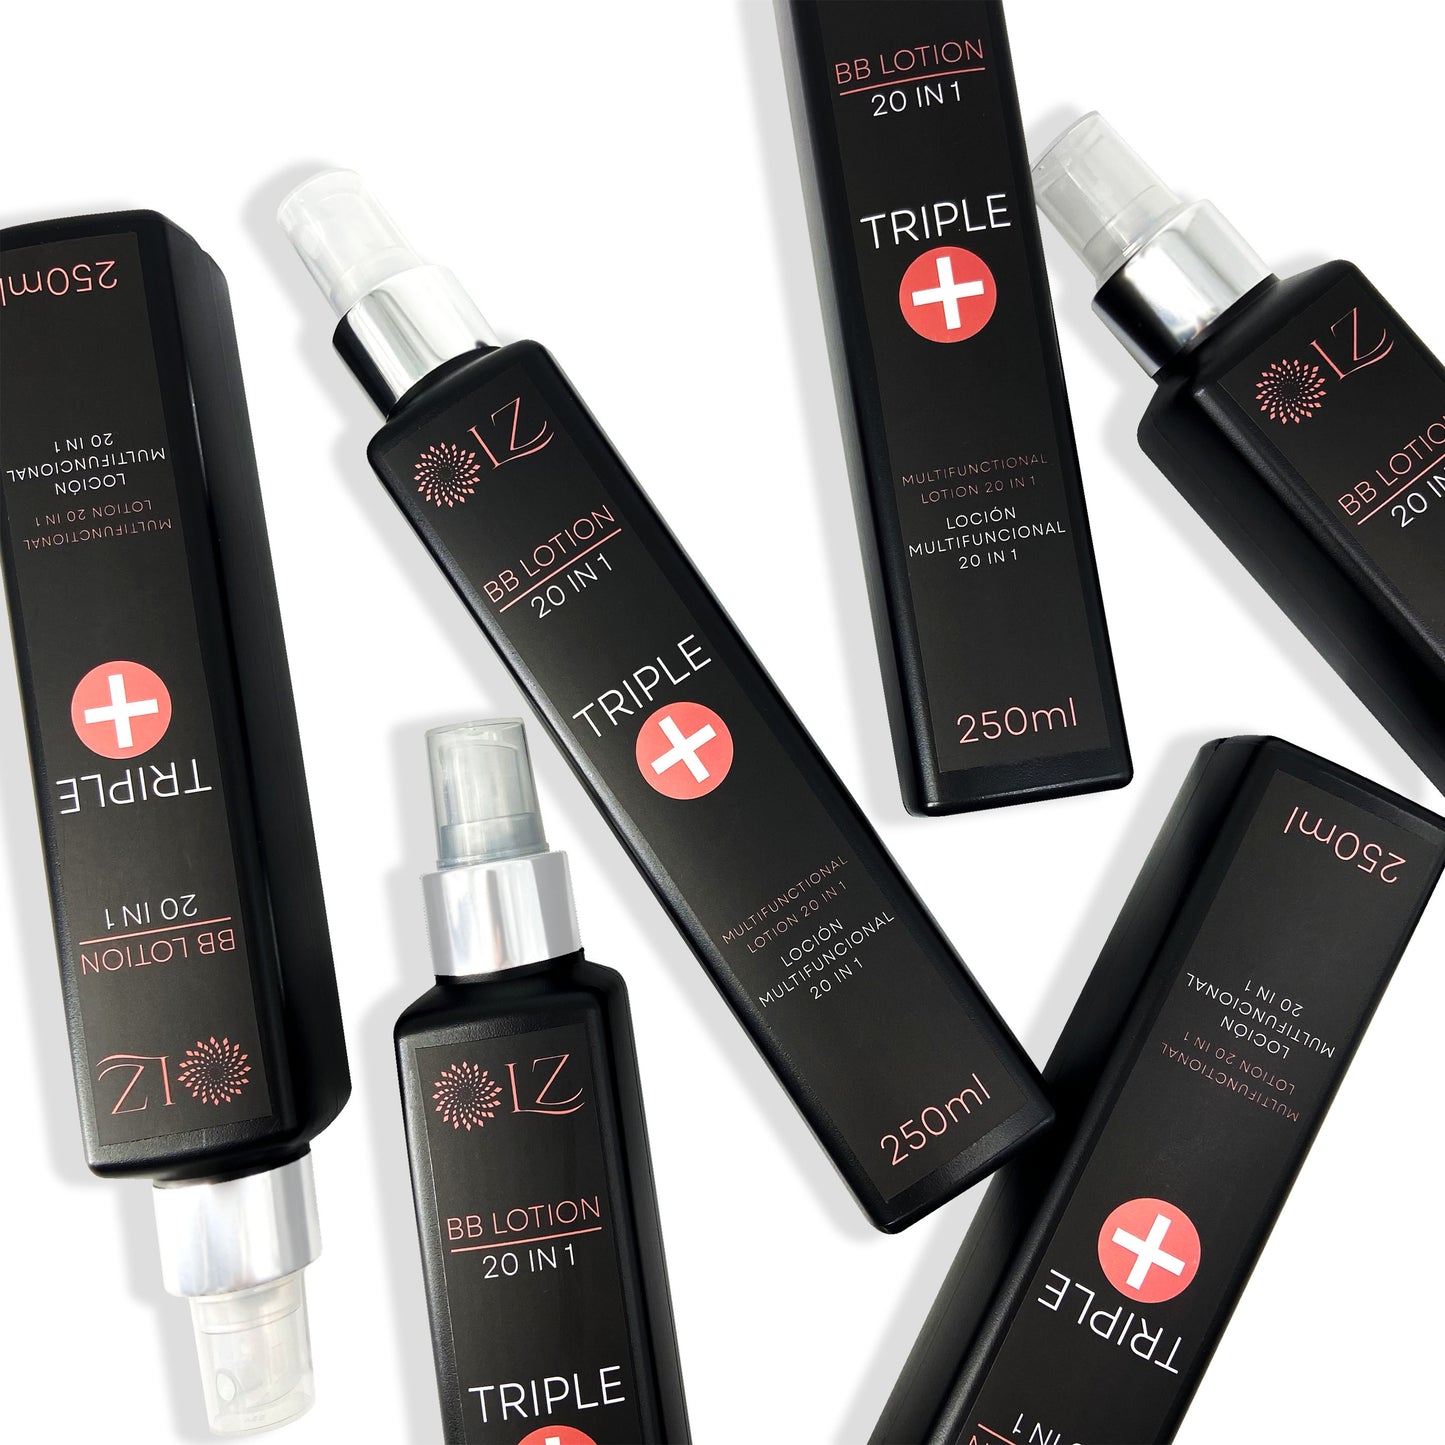 BB LOTION 20 IN 1